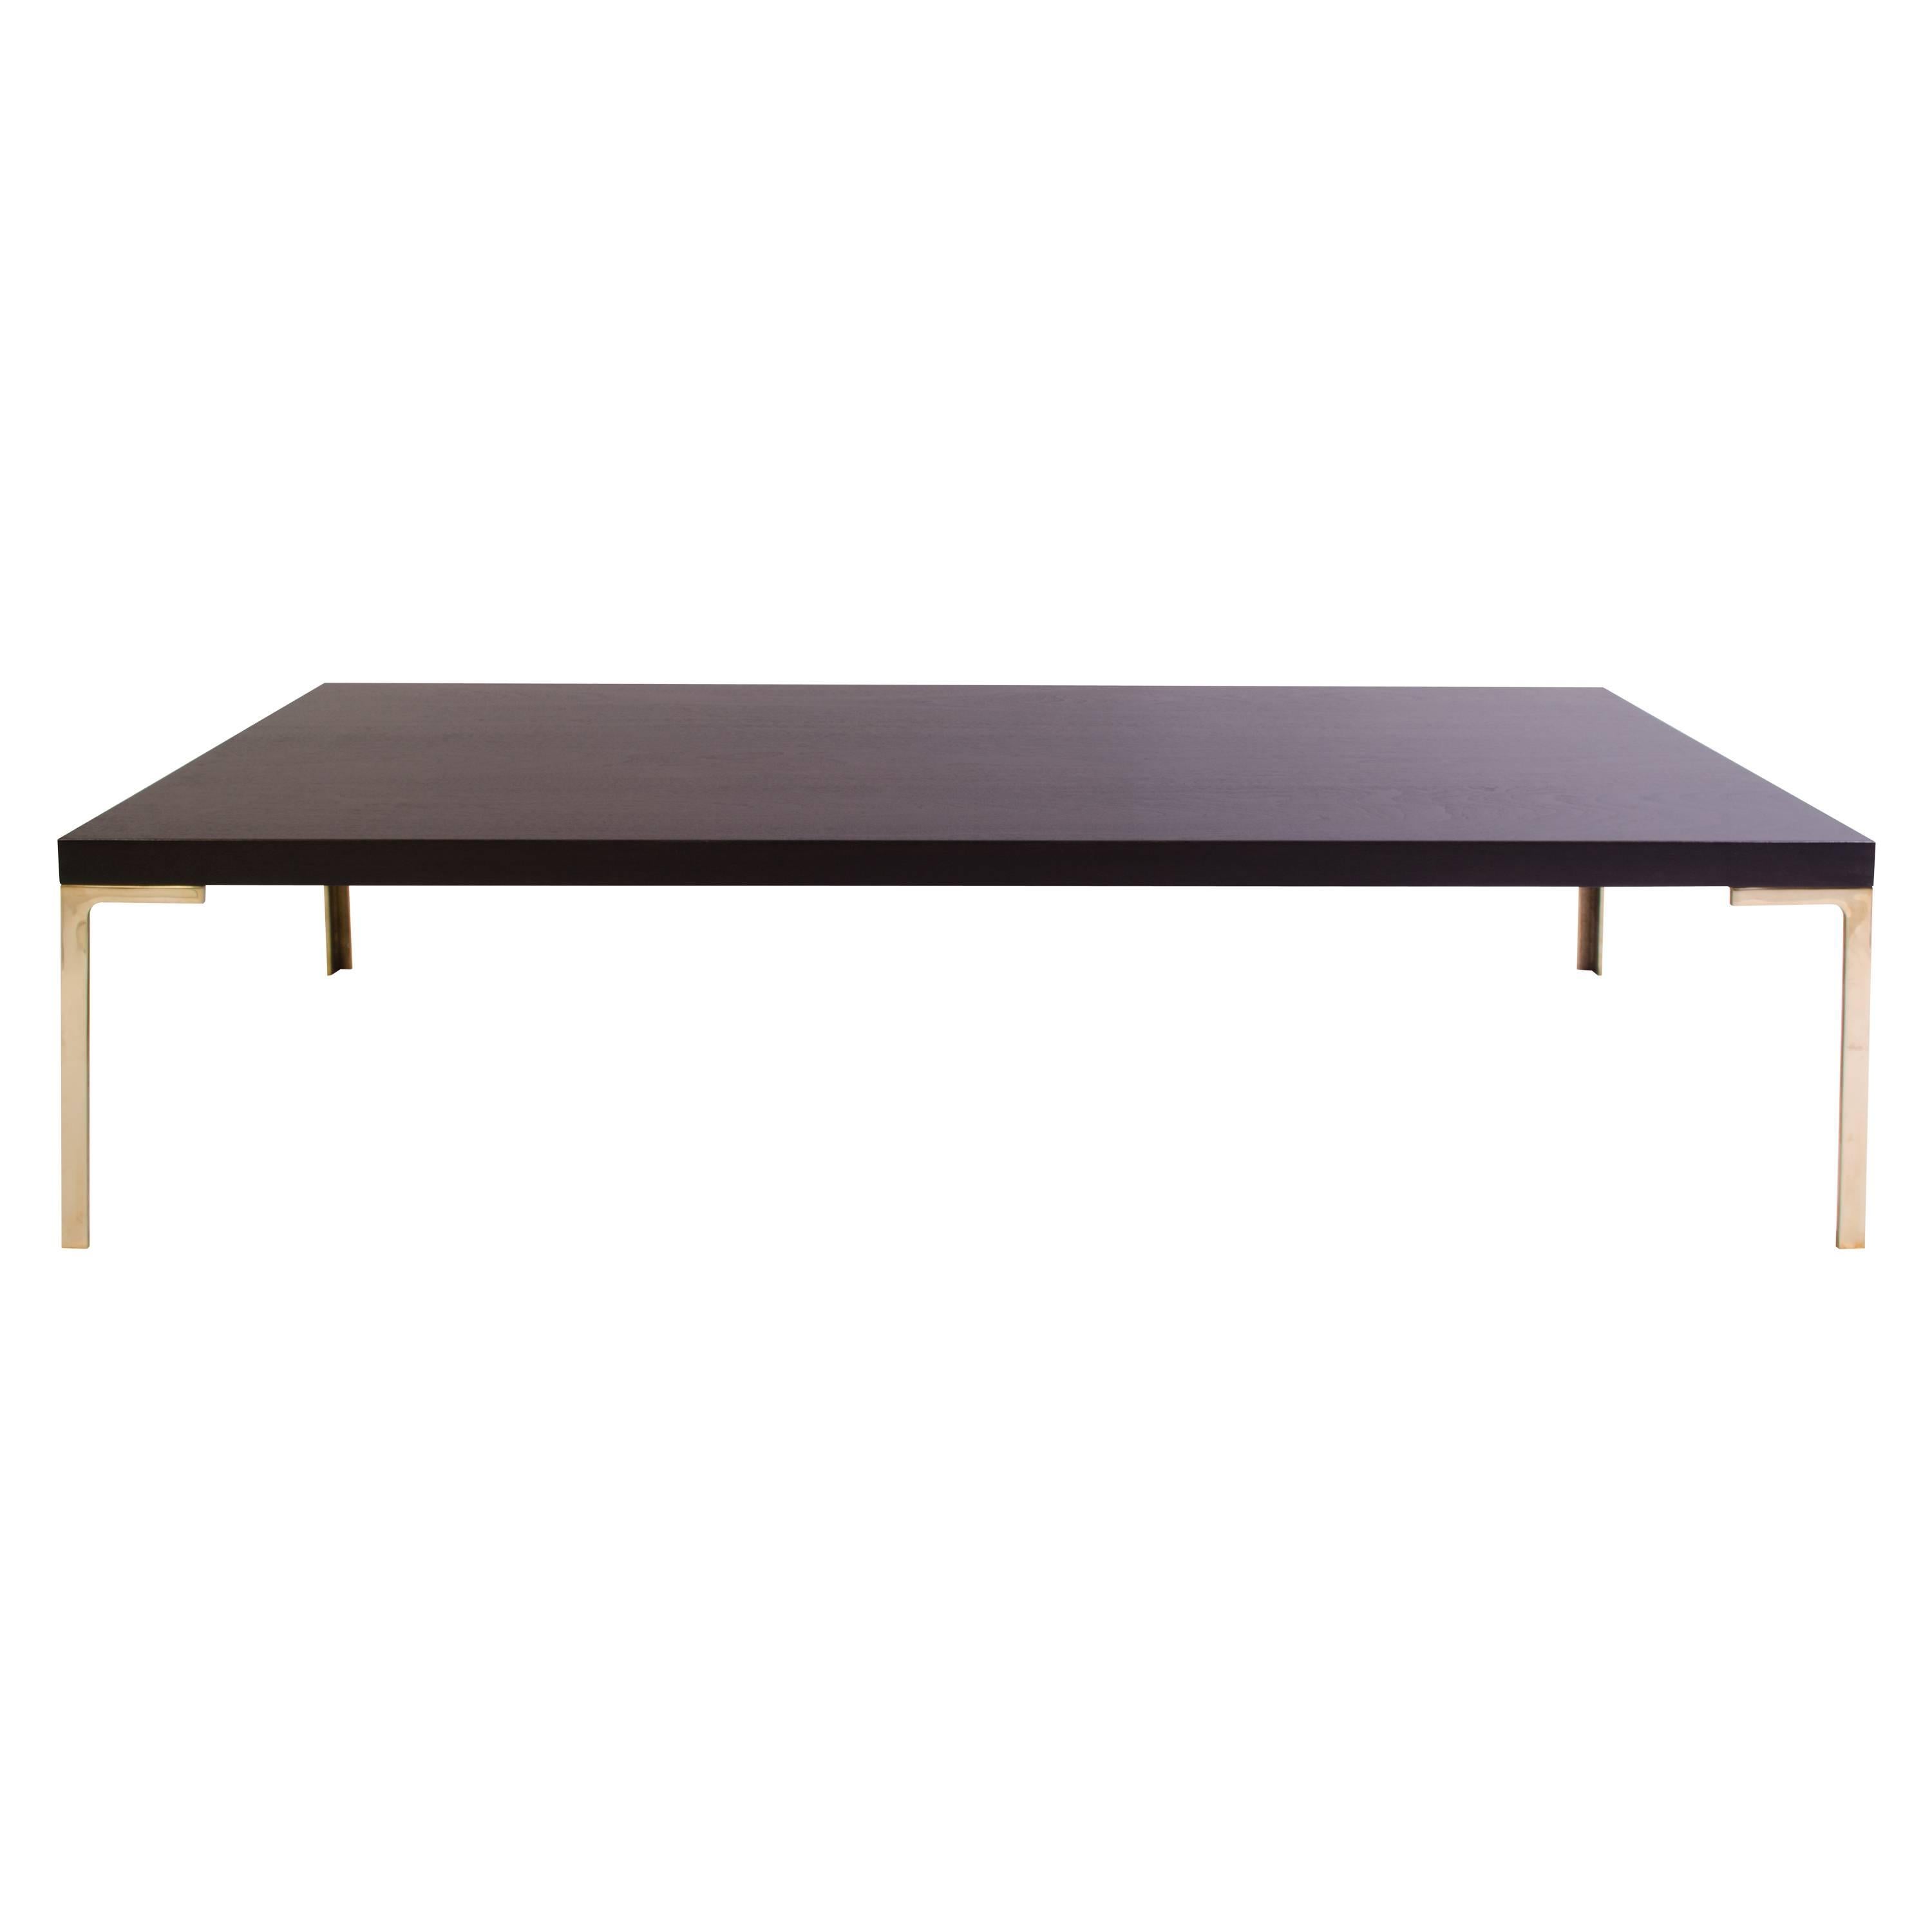 Astor Cocktail Table in Ebonized Walnut with Brass Legs by Montage, 60" x 24"